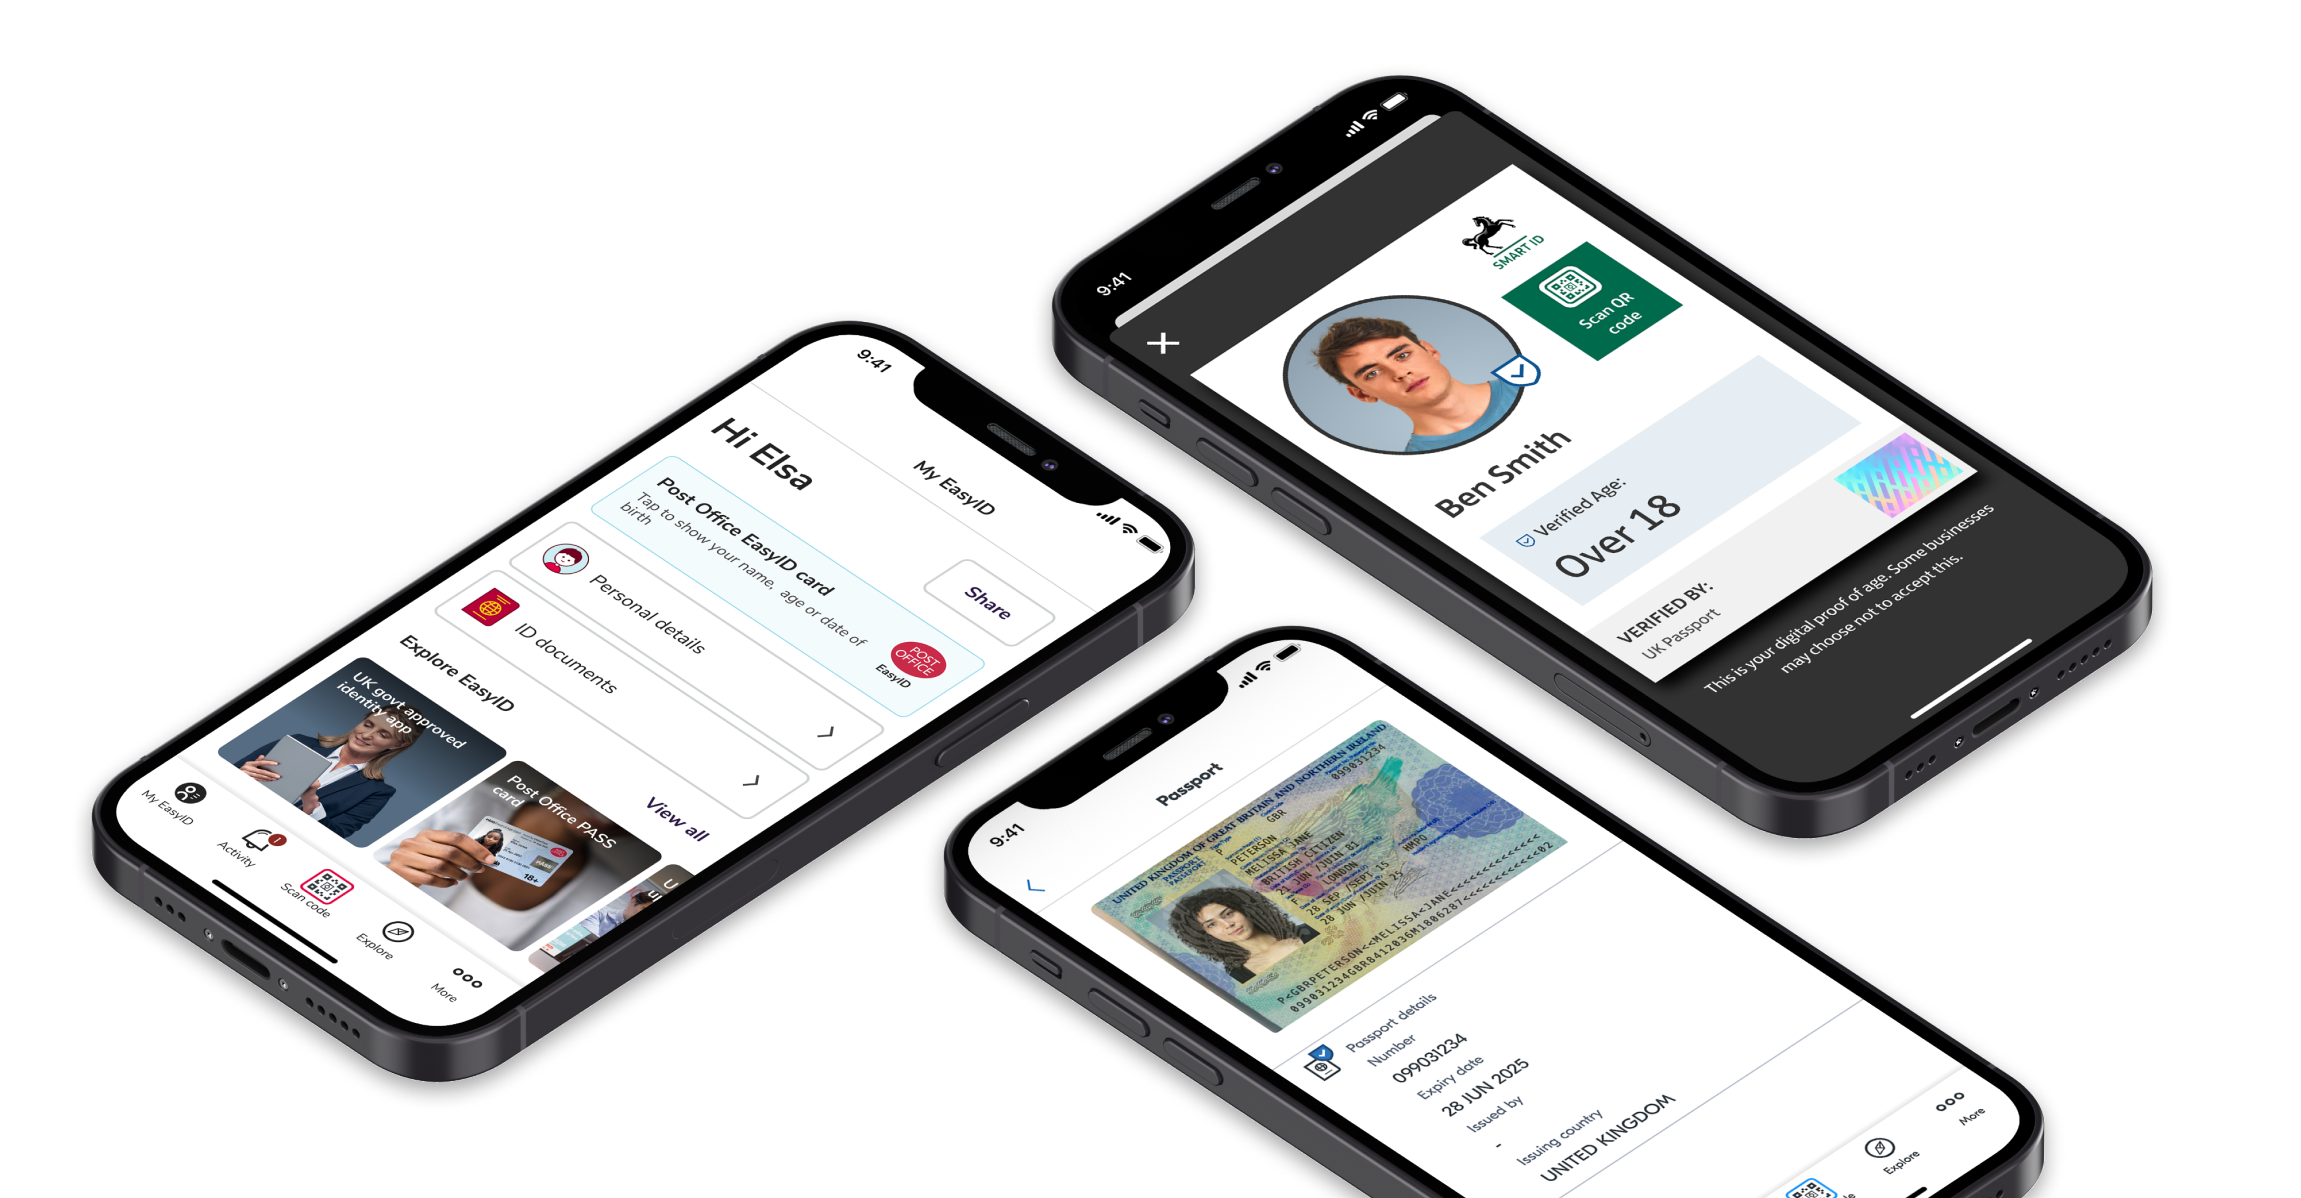 Post Office EasyID, Yoti ID and Lloyds Bank Smart ID apps are all part of Digital ID Connect